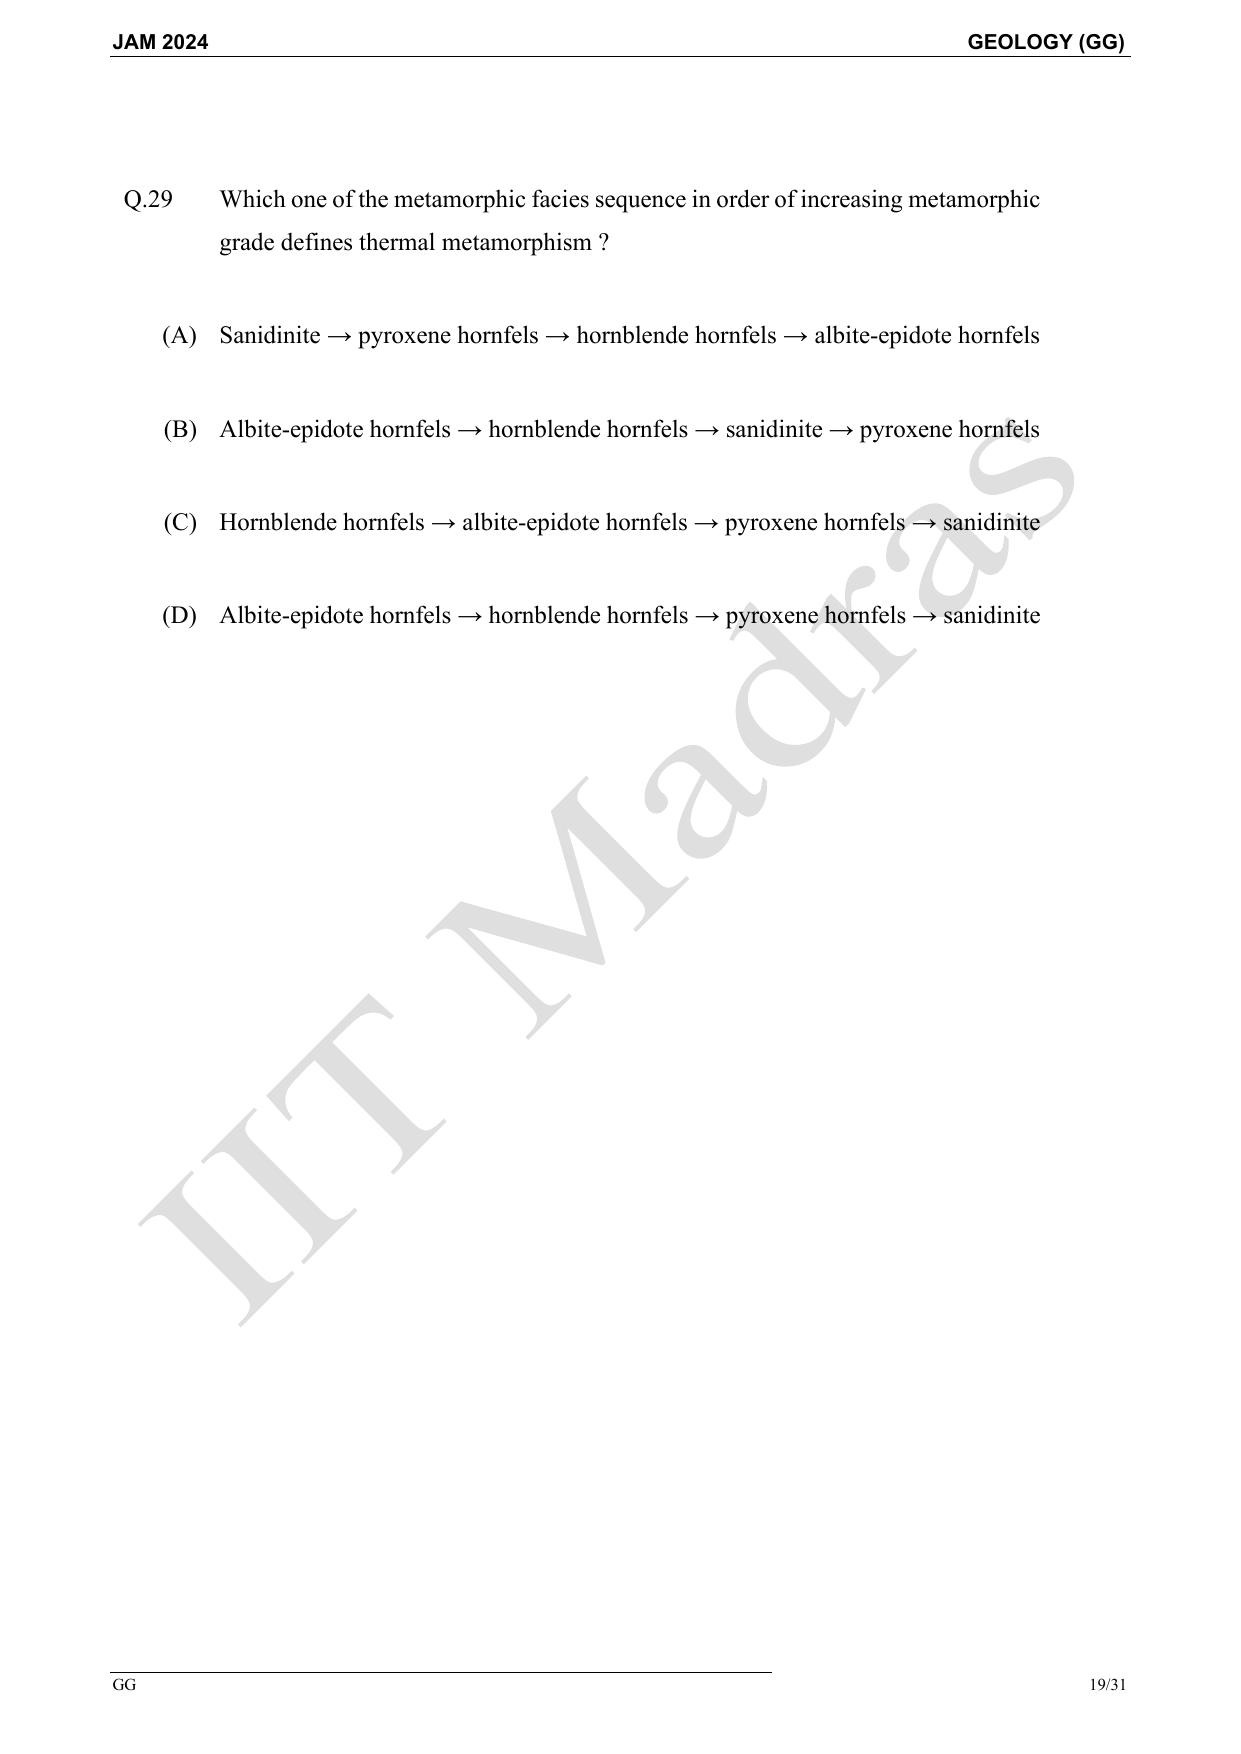 IIT JAM 2024 Geology (GG) Master Question Paper - Page 19